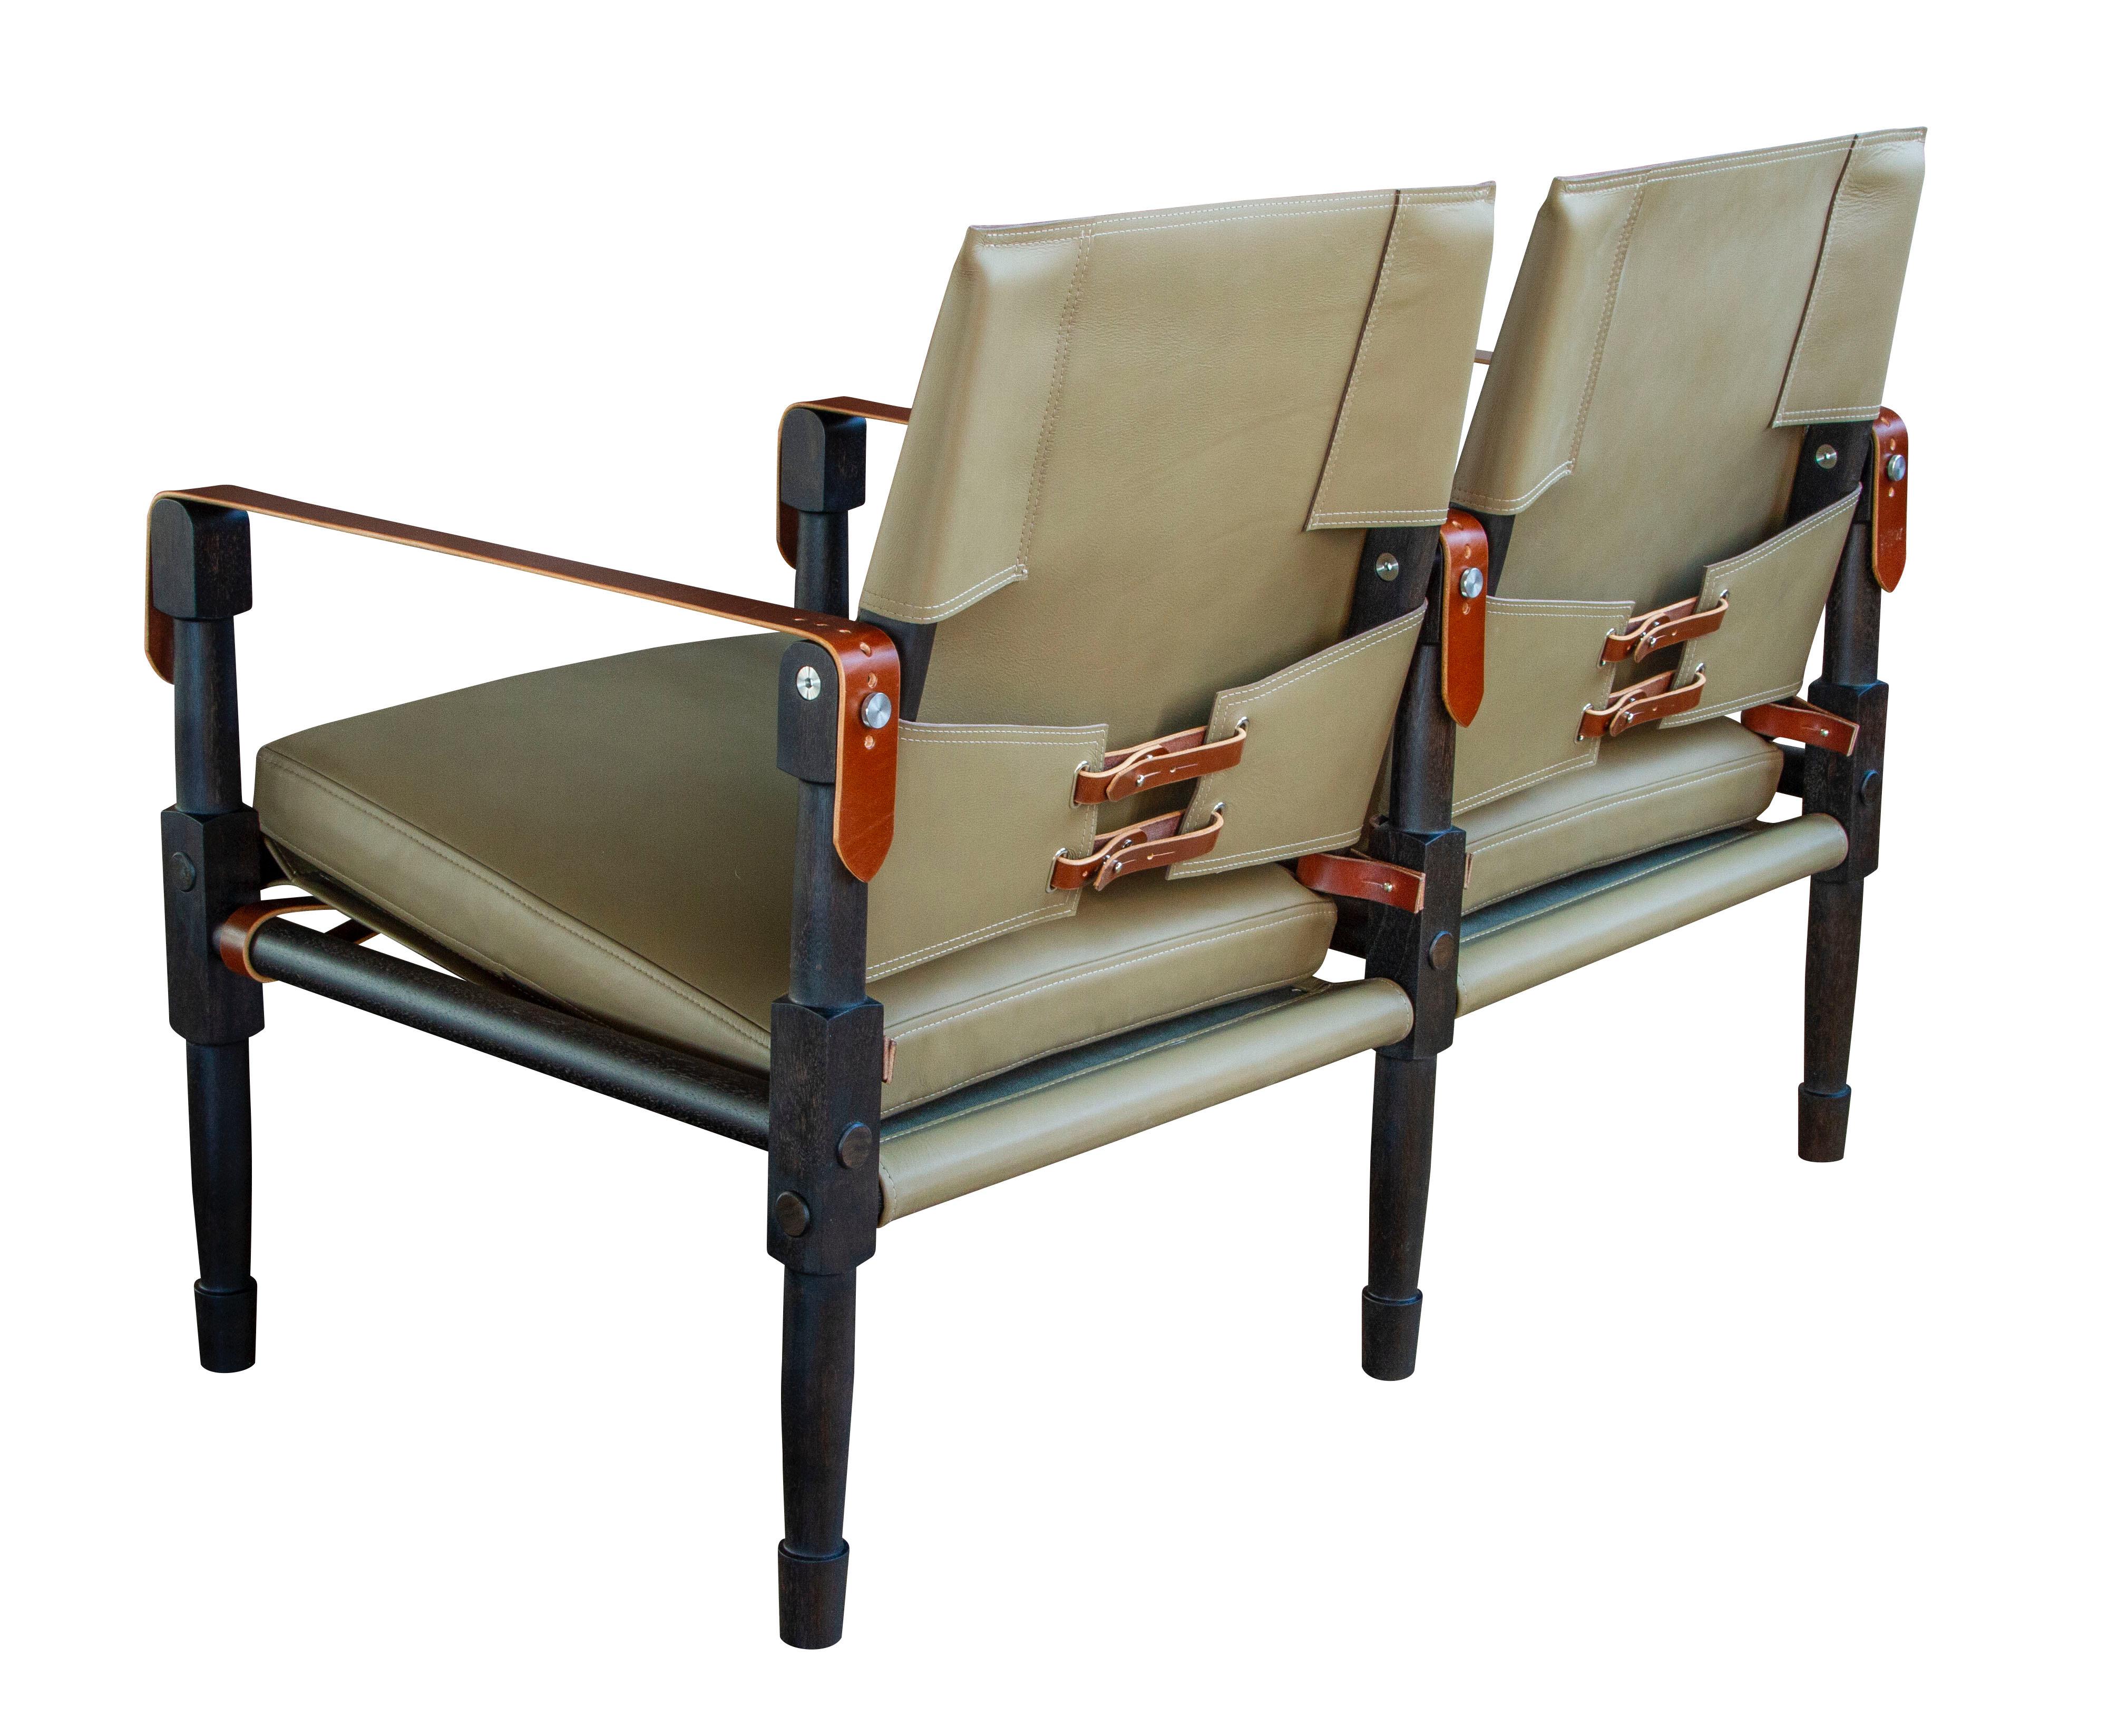 The Chatwin lounge settee in ebonized walnut with Cortina olive leather and Havana English bridle leather strapping.

The modern campaign collection by Richard Wrightman combines the vernacular of traditional form with a modern aesthetic, mixing